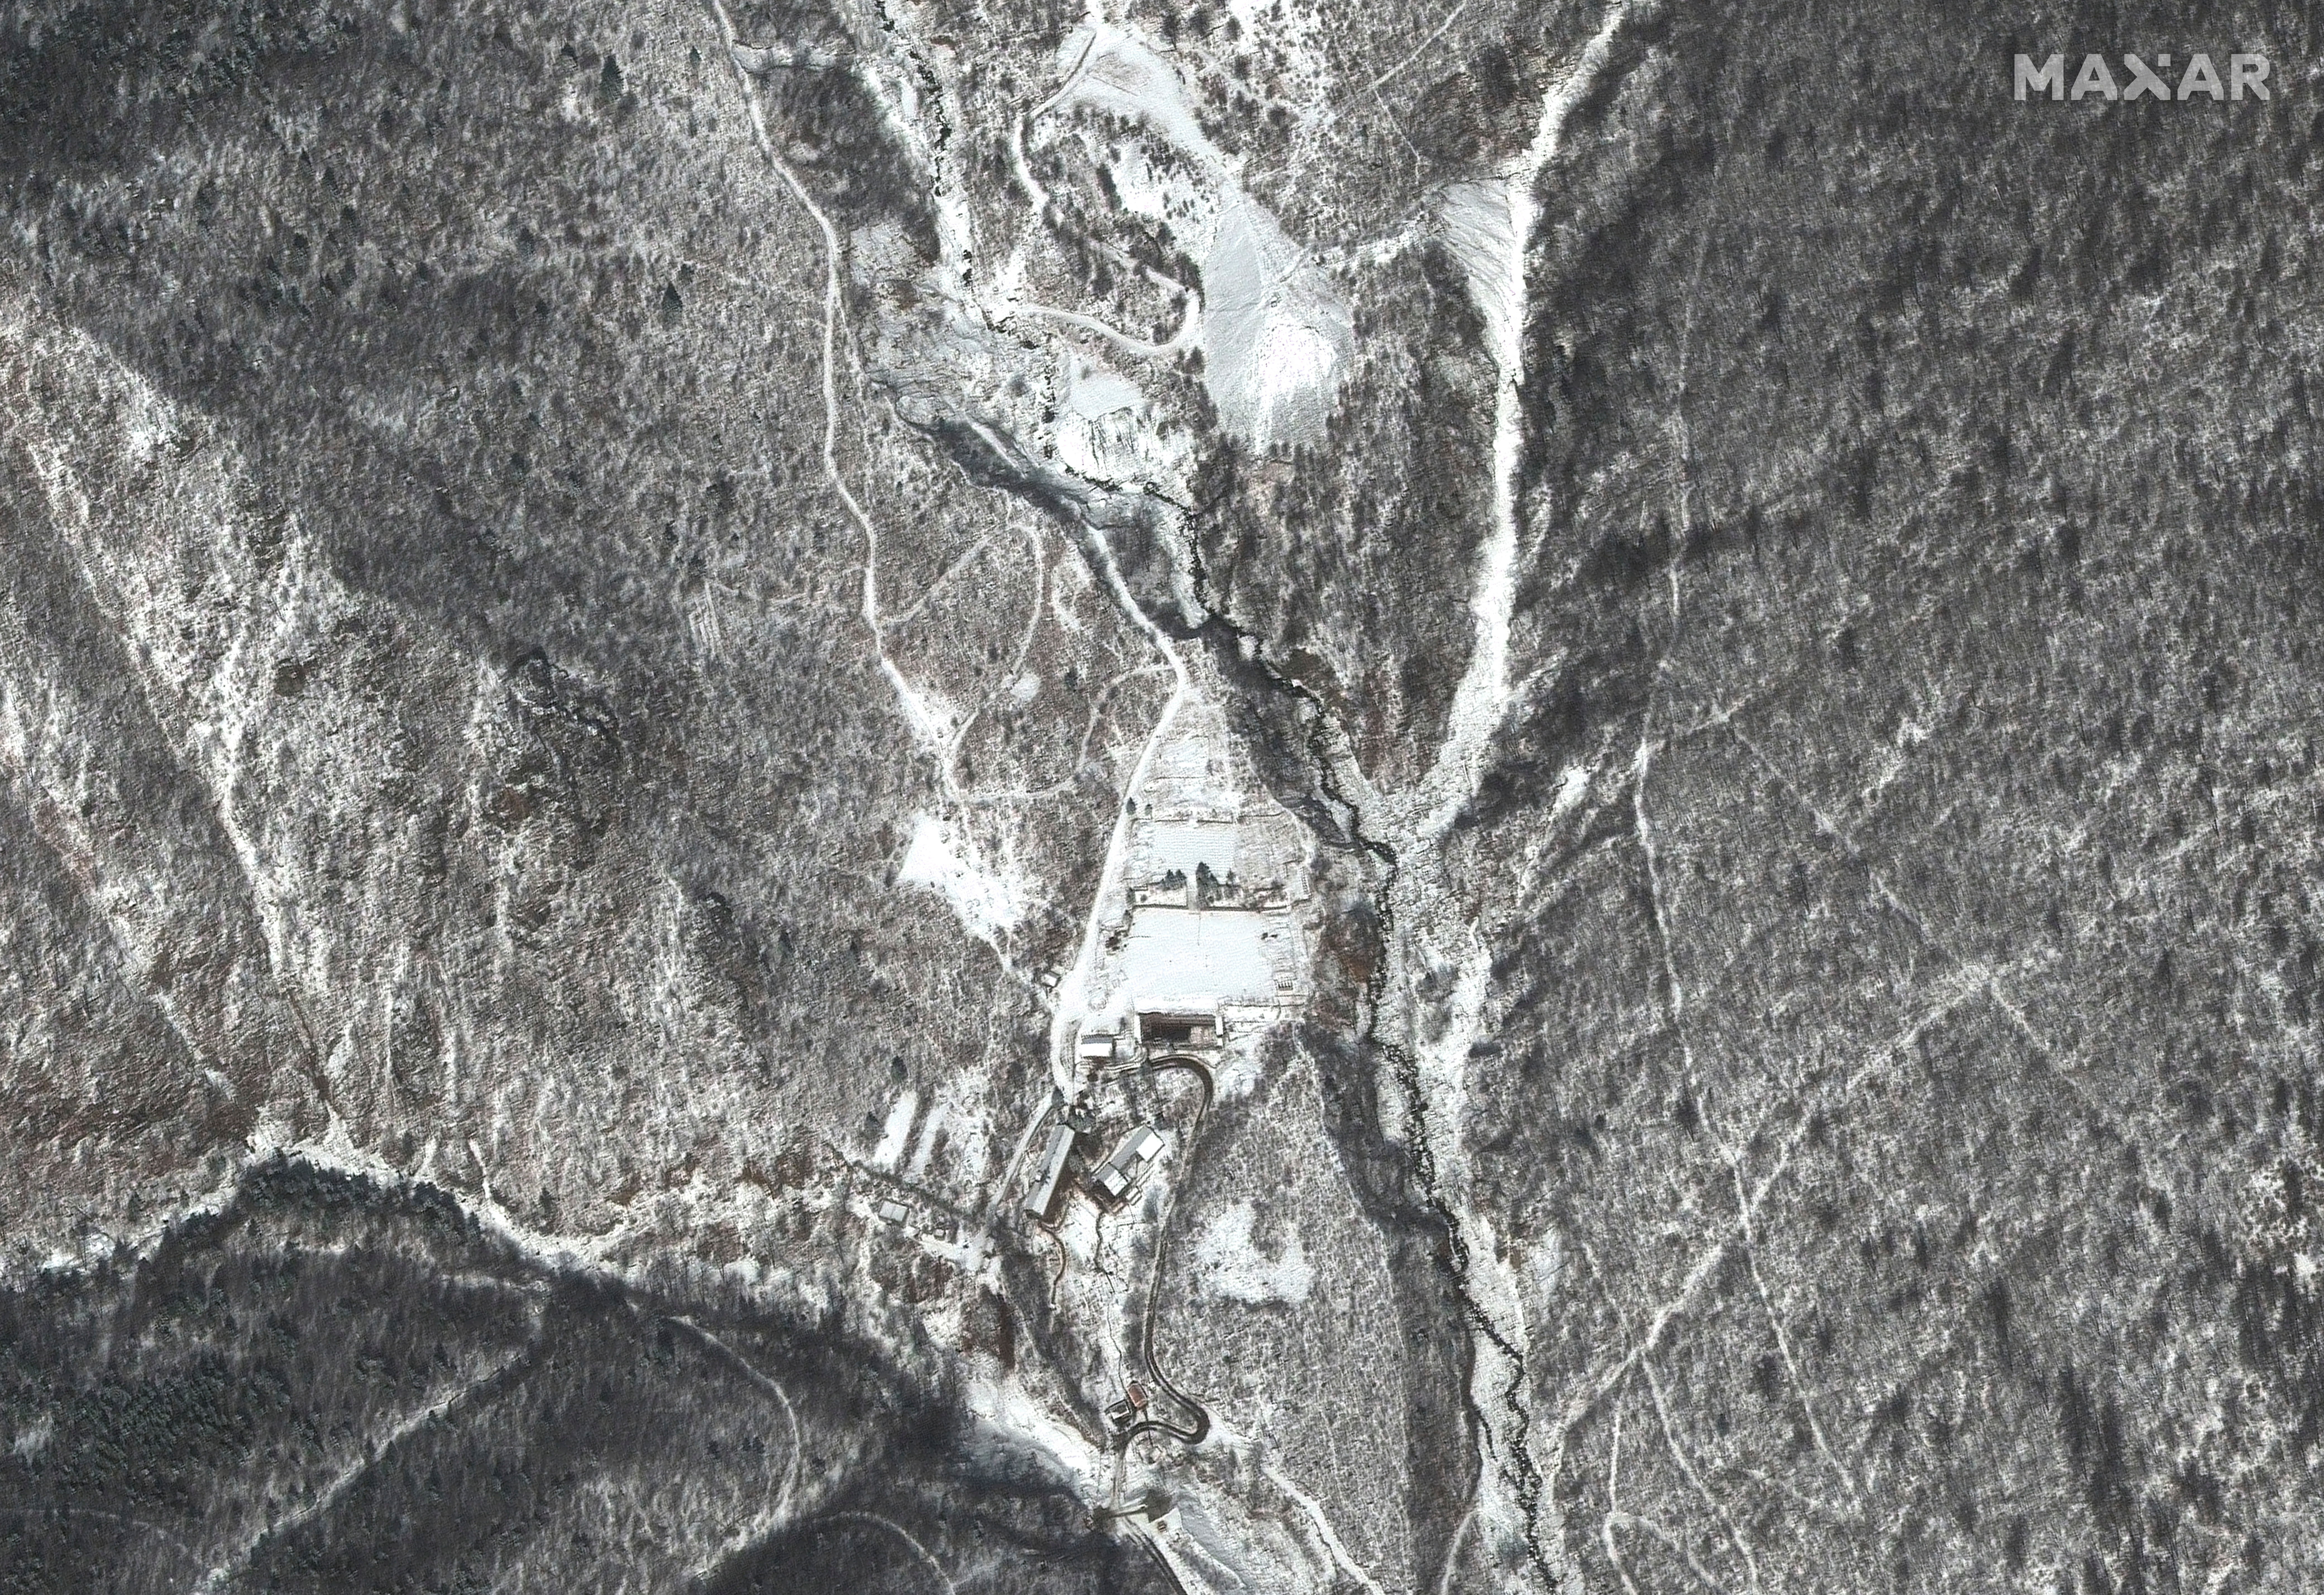 A satellite image shows an overview of the Punggye-ri nuclear test site